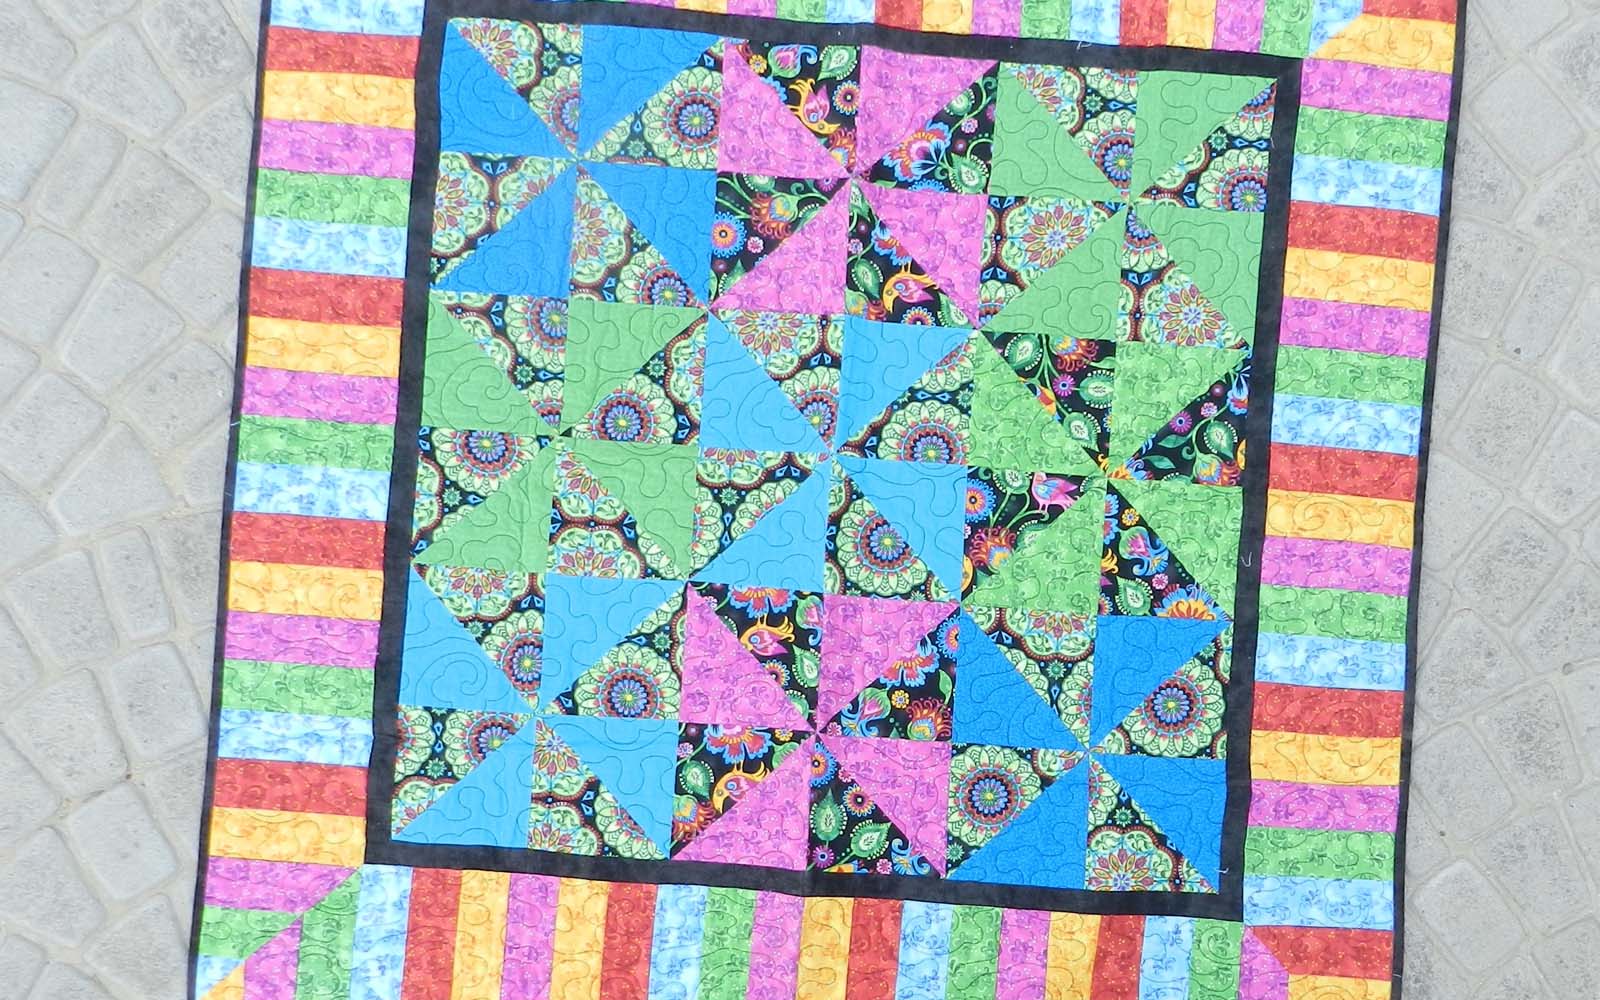 Colourful quilt on paving stones